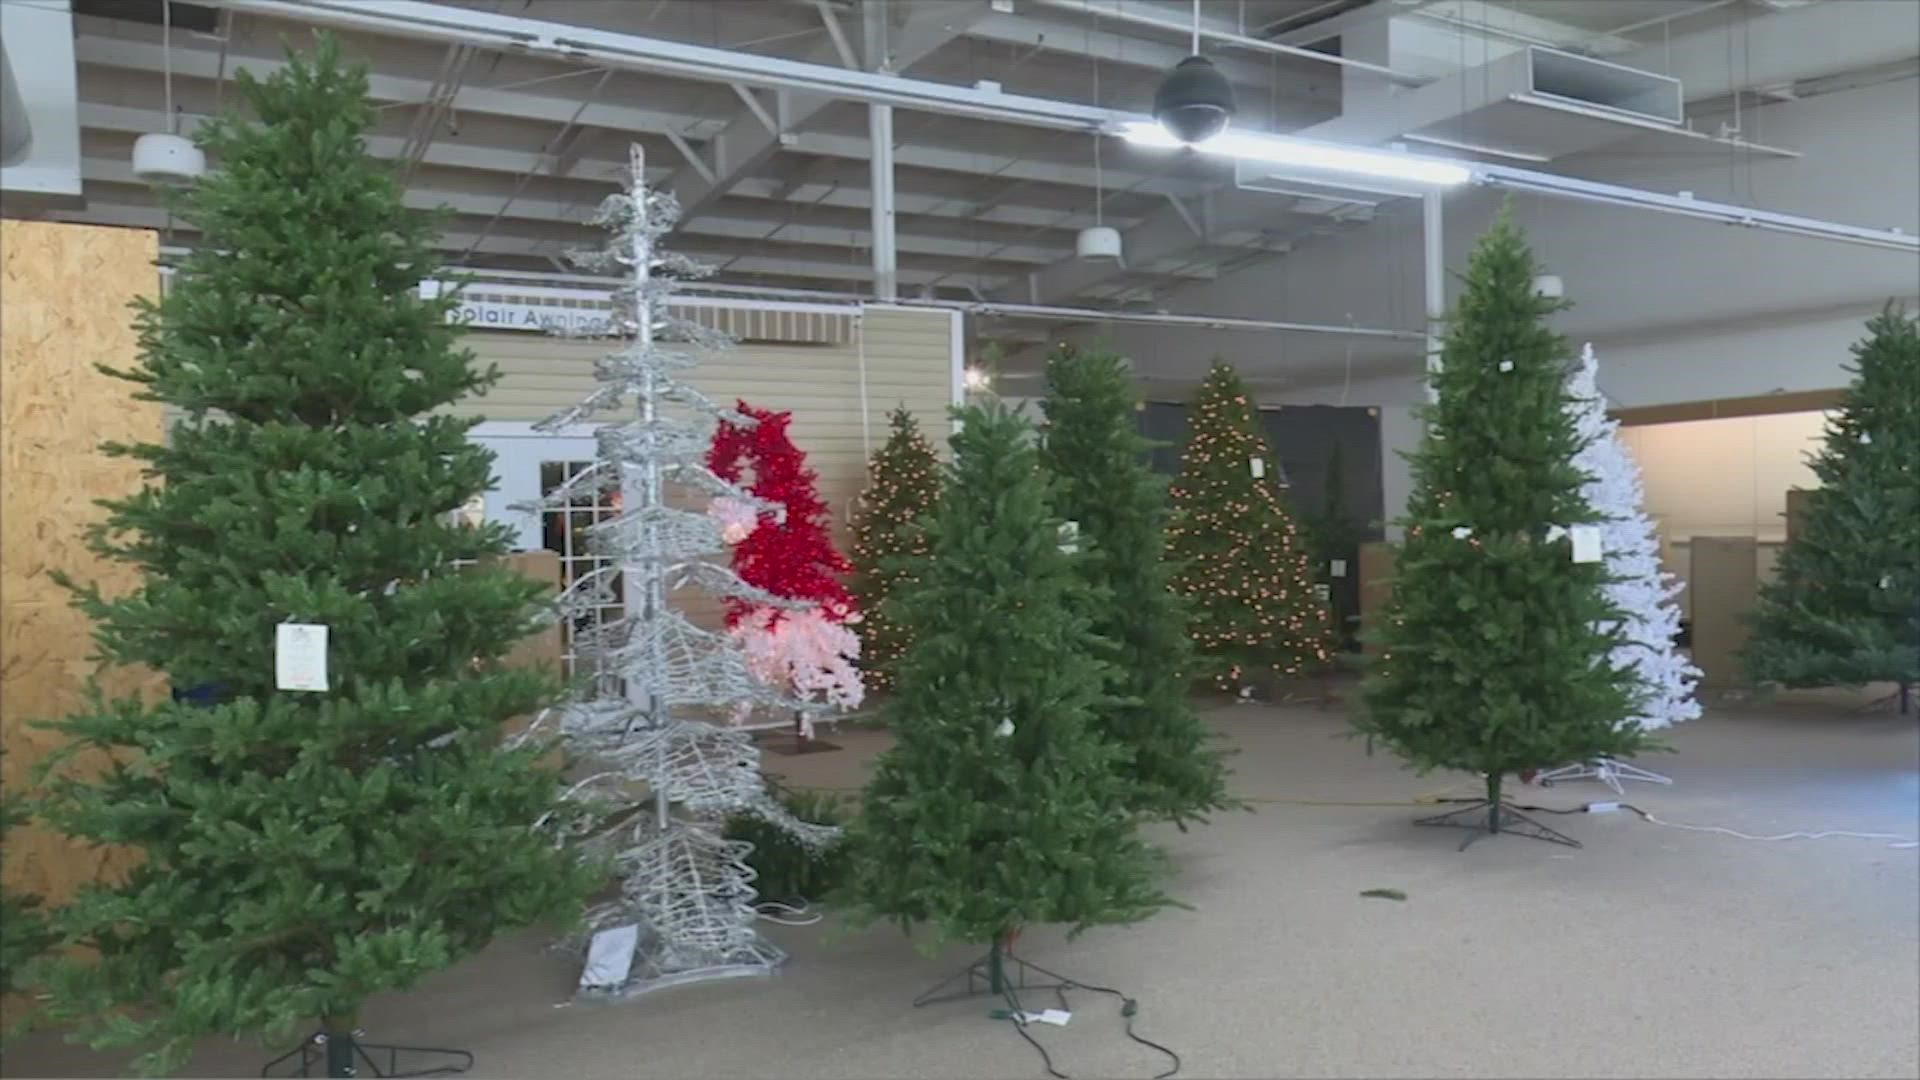 Consumer reporter John Matarese explains why you're probably not seeing many Christmas trees this year, so you don't waste your money.